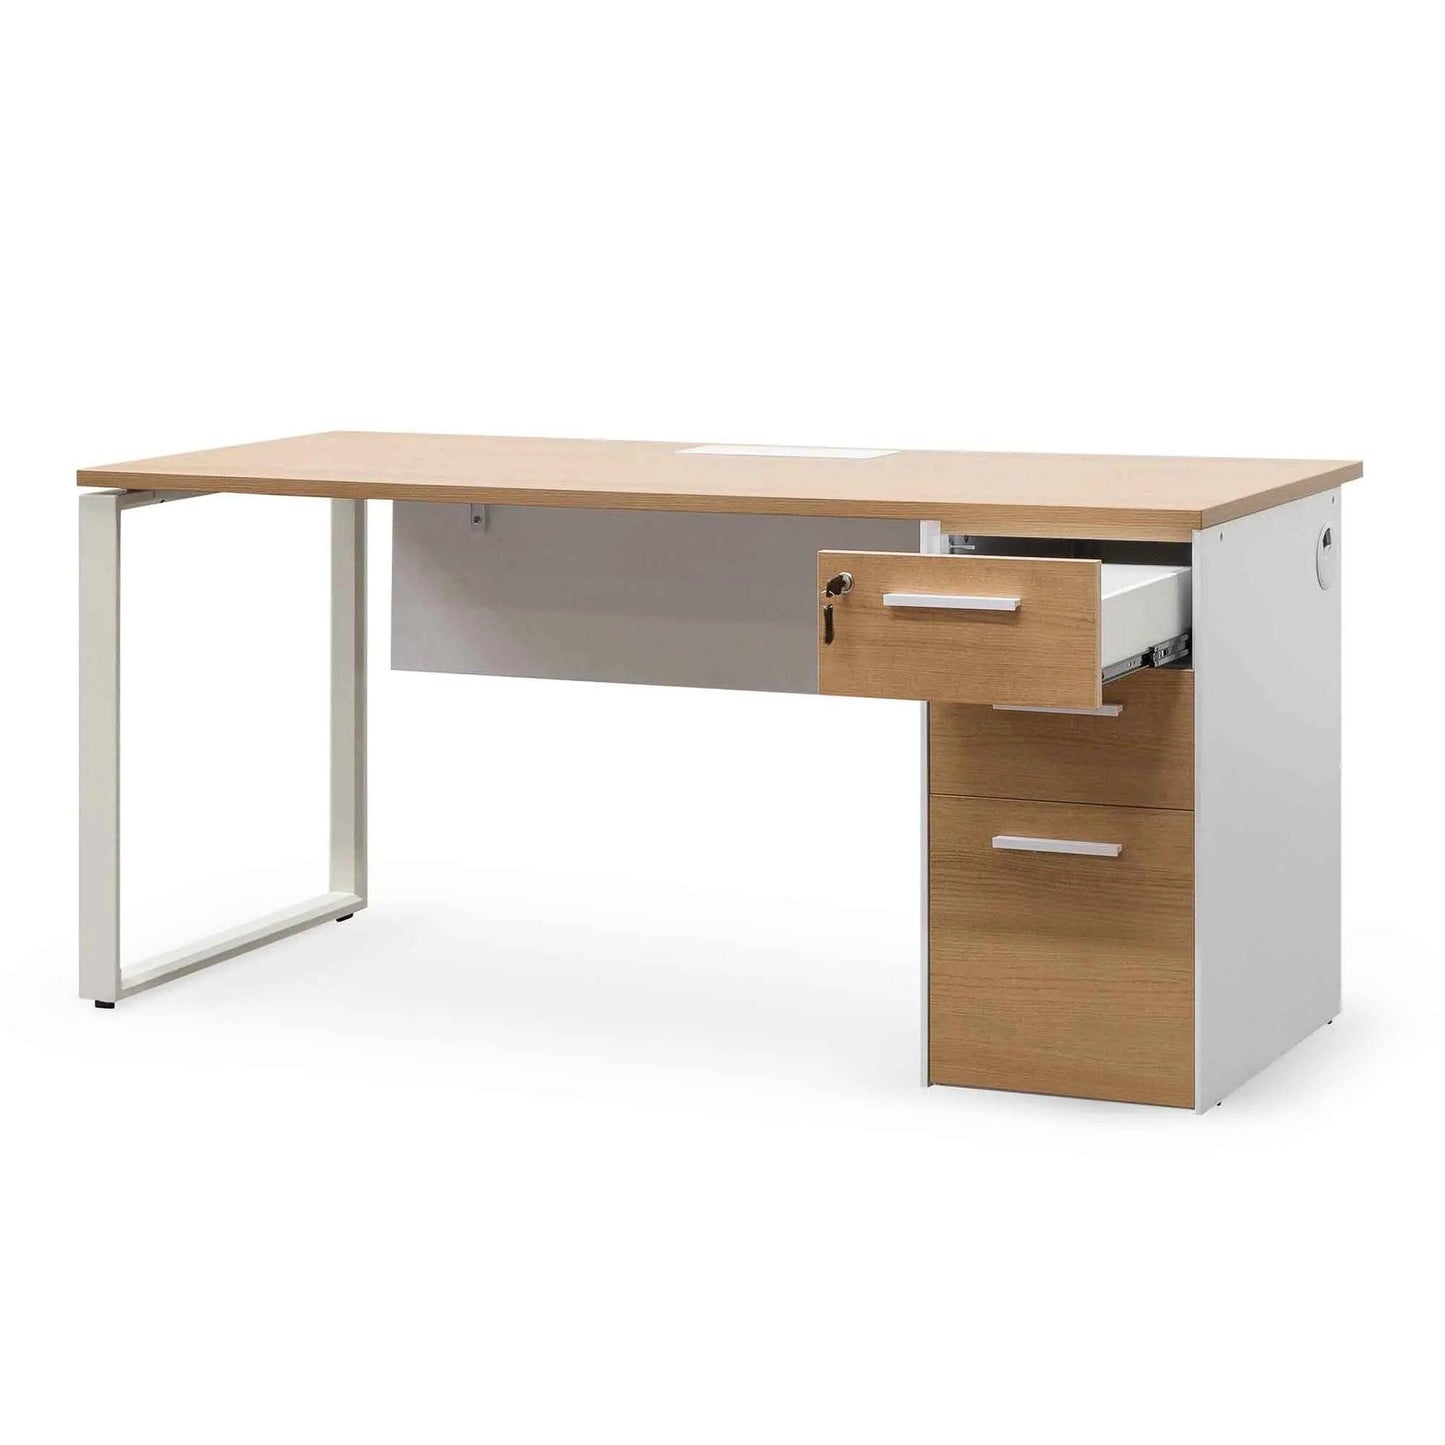 Calibre 1 Seater Office Desk - Natural and White OT6541-SN - Office DesksOT6541-SN 5